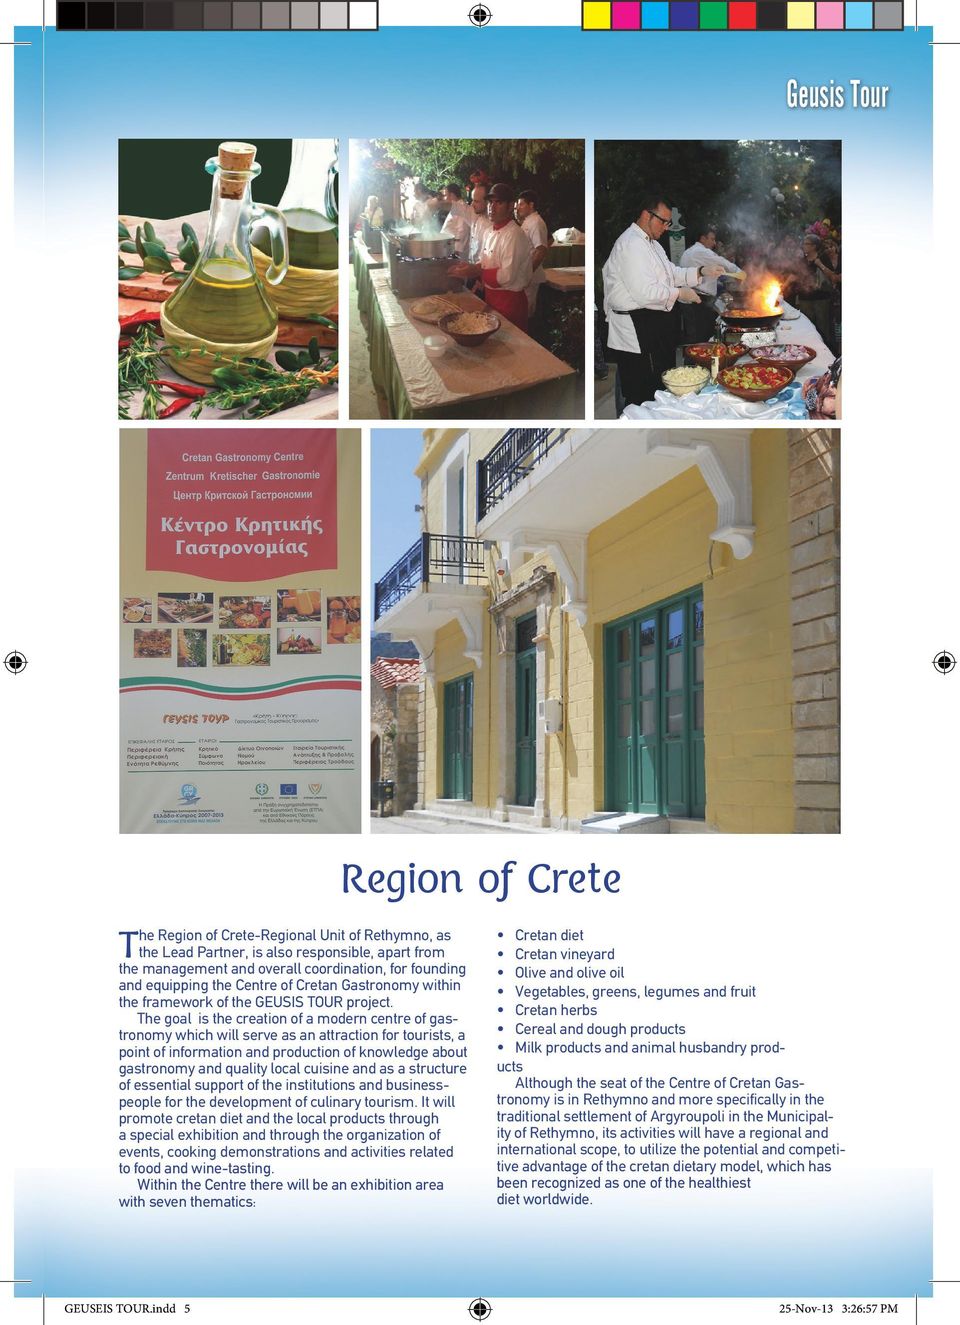 The goal is the creation of a modern centre of gastronomy which will serve as an attraction for tourists, a point of information and production of knowledge about gastronomy and quality local cuisine